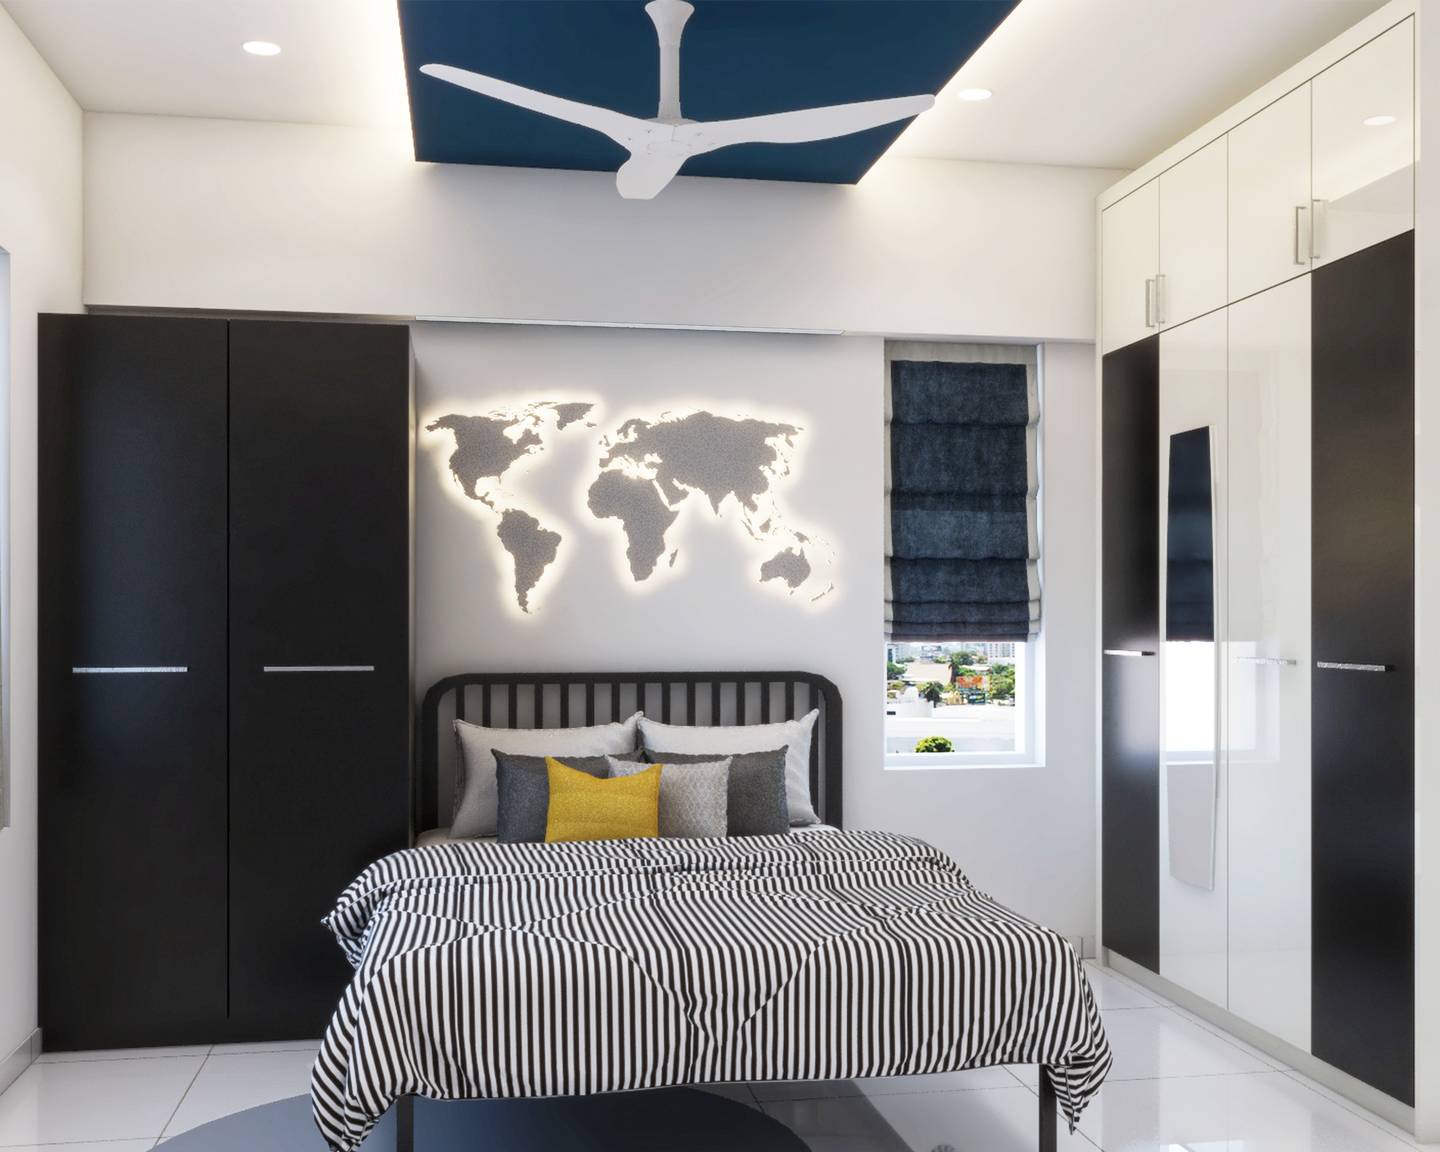 Compact Bedroom with World Map Mural - Livspace